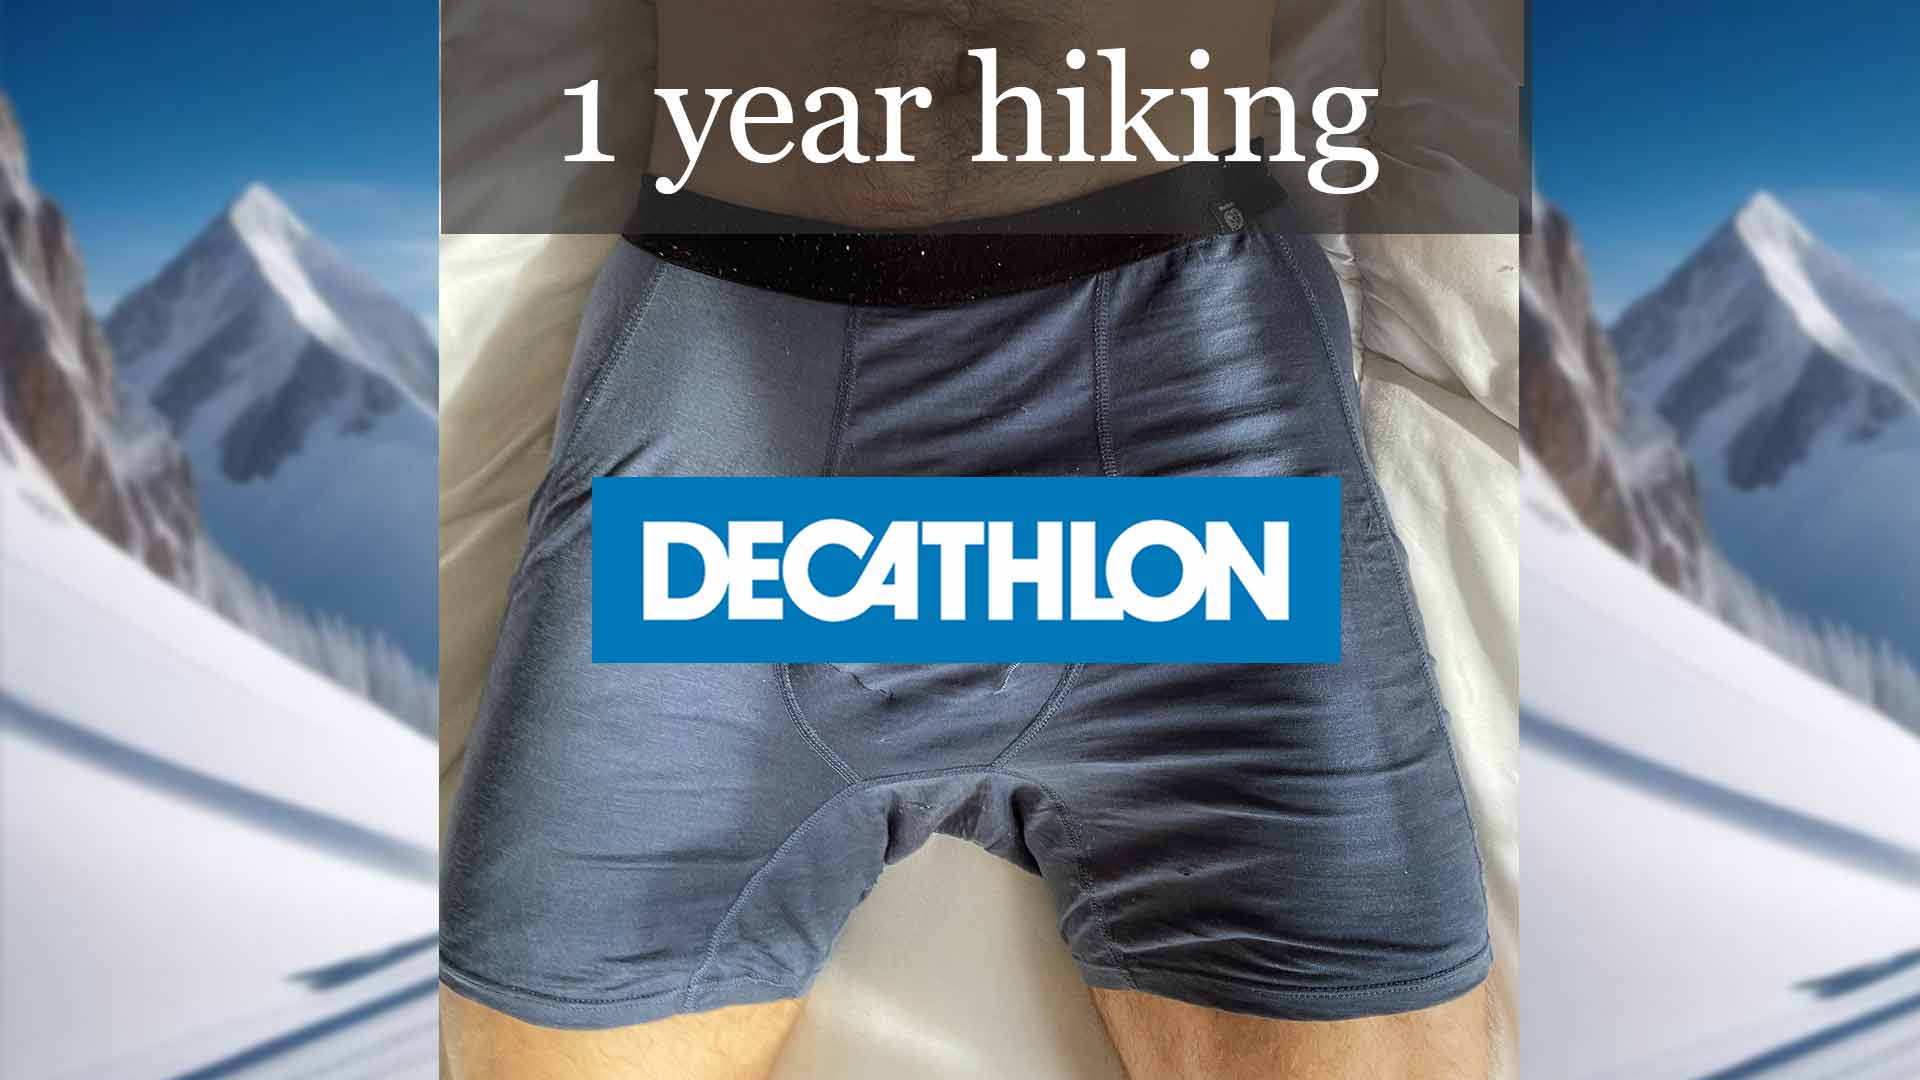 Review: Forclaz merino MT500 boxers – Decathlons underwear speciality!